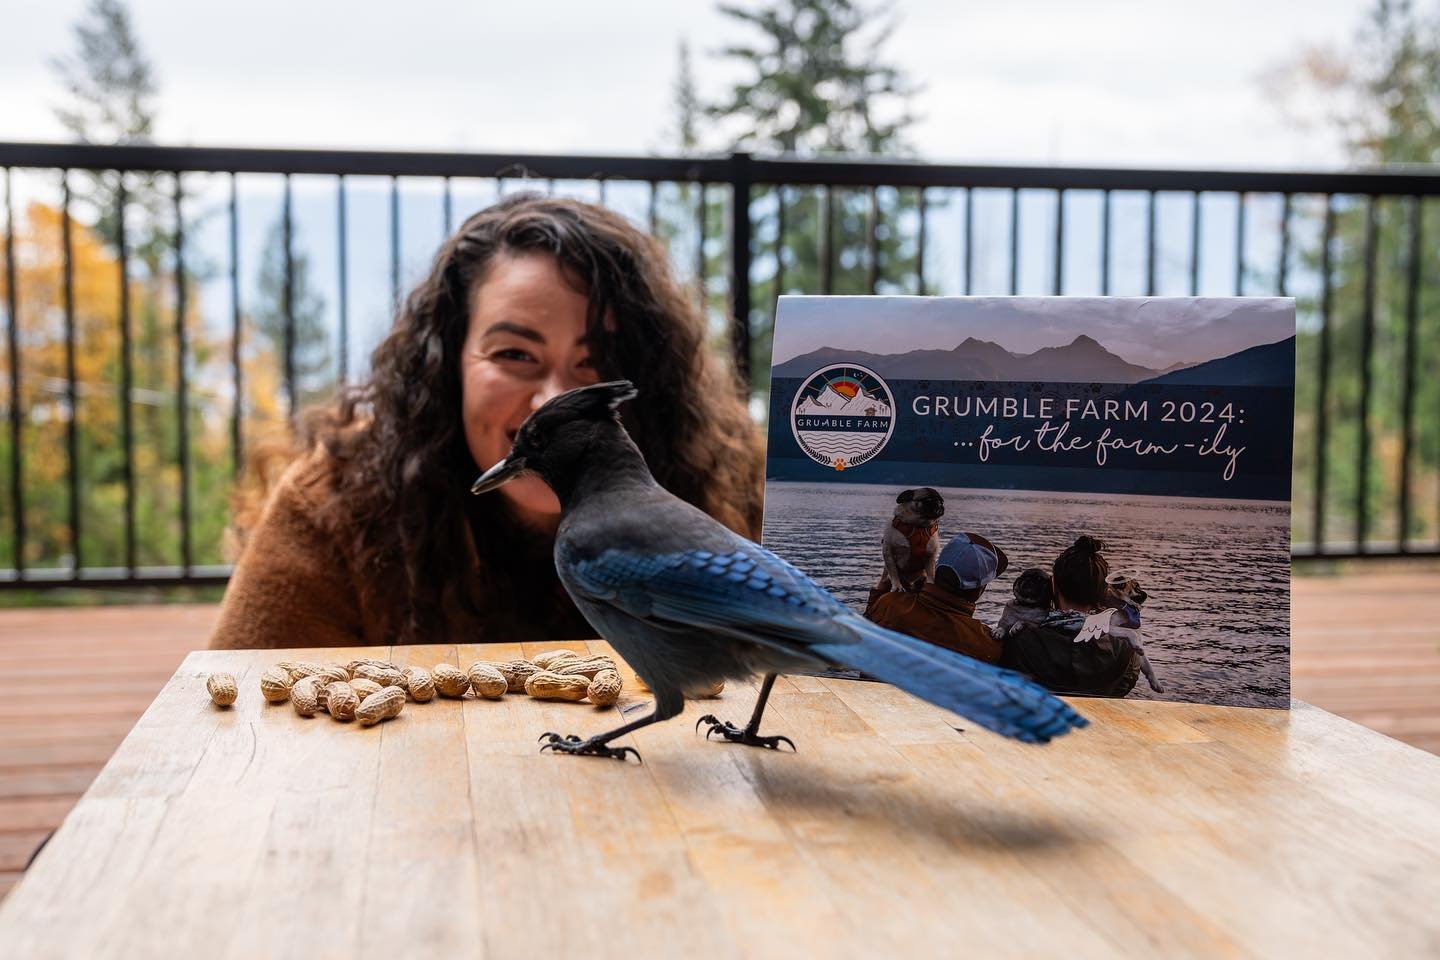 Just a few product shots that @jesseschpakowski captured out on the deck recently with the Steller&rsquo;s Jays, @grumblefarm&rsquo;s 2024 calendar and&hellip; well, me 💙

More details on this year&rsquo;s calendar can be found over on Grumble Farm&